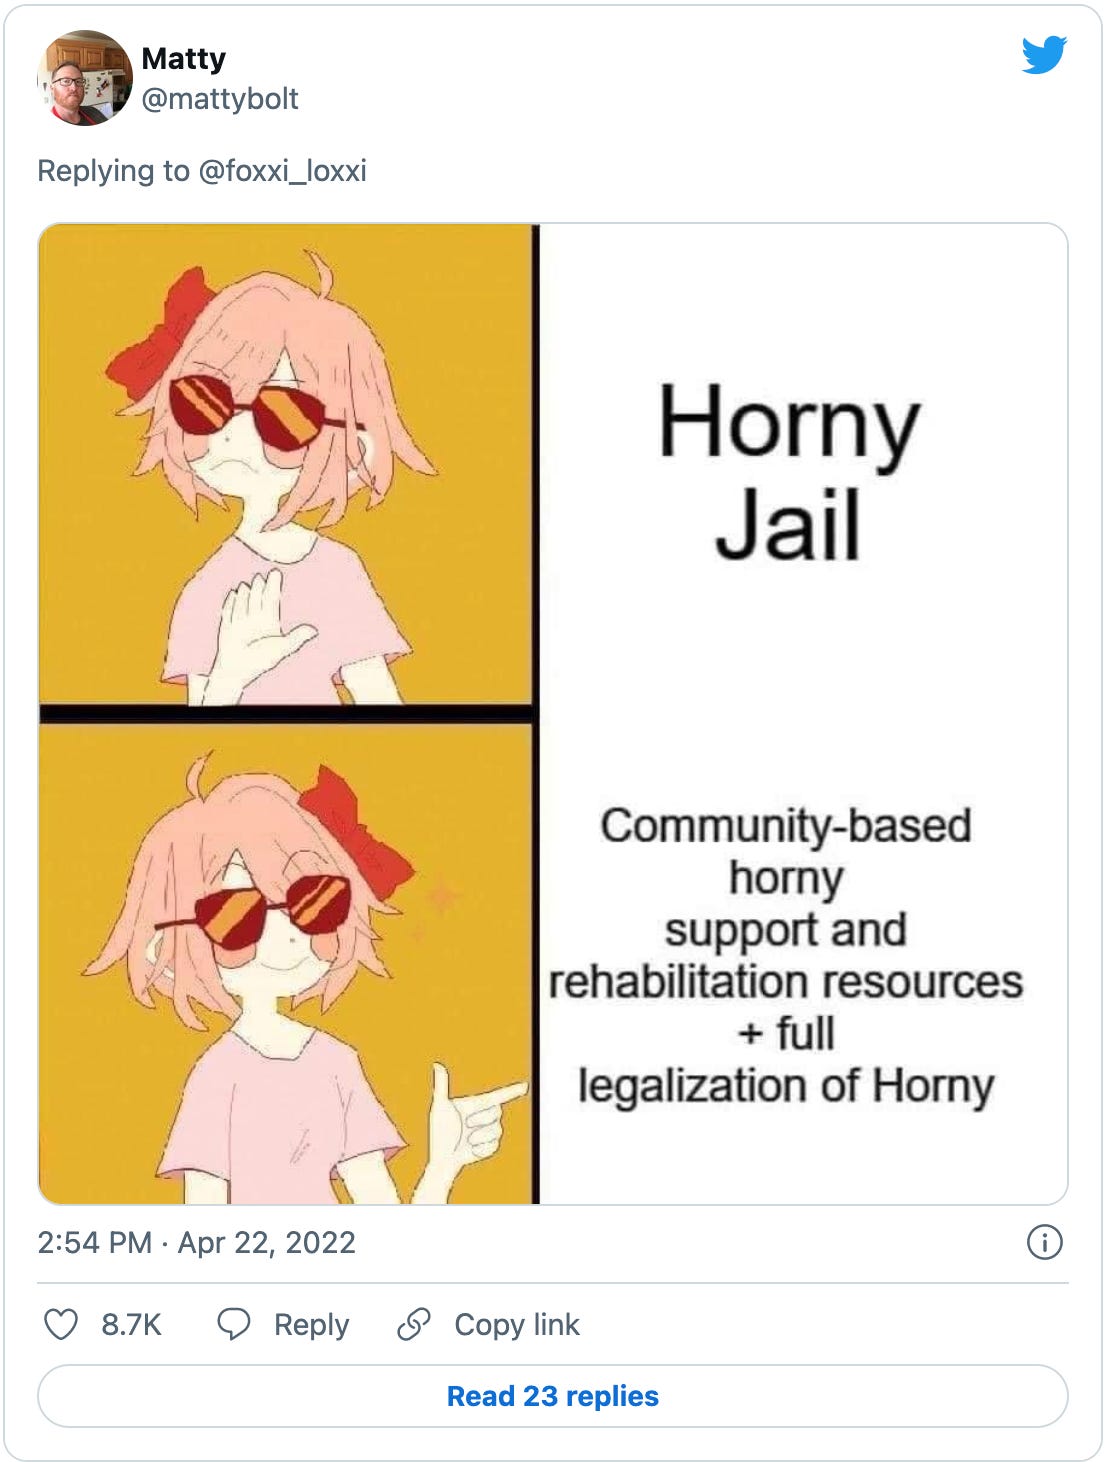 Tweet from @mattybolt with a Sayori Drake meme (listen, just Google it) where the “nope” box says “Horny Jail” and the finger guns box says “Community-based horny support and rehabilitation resources + full legalization of horny”